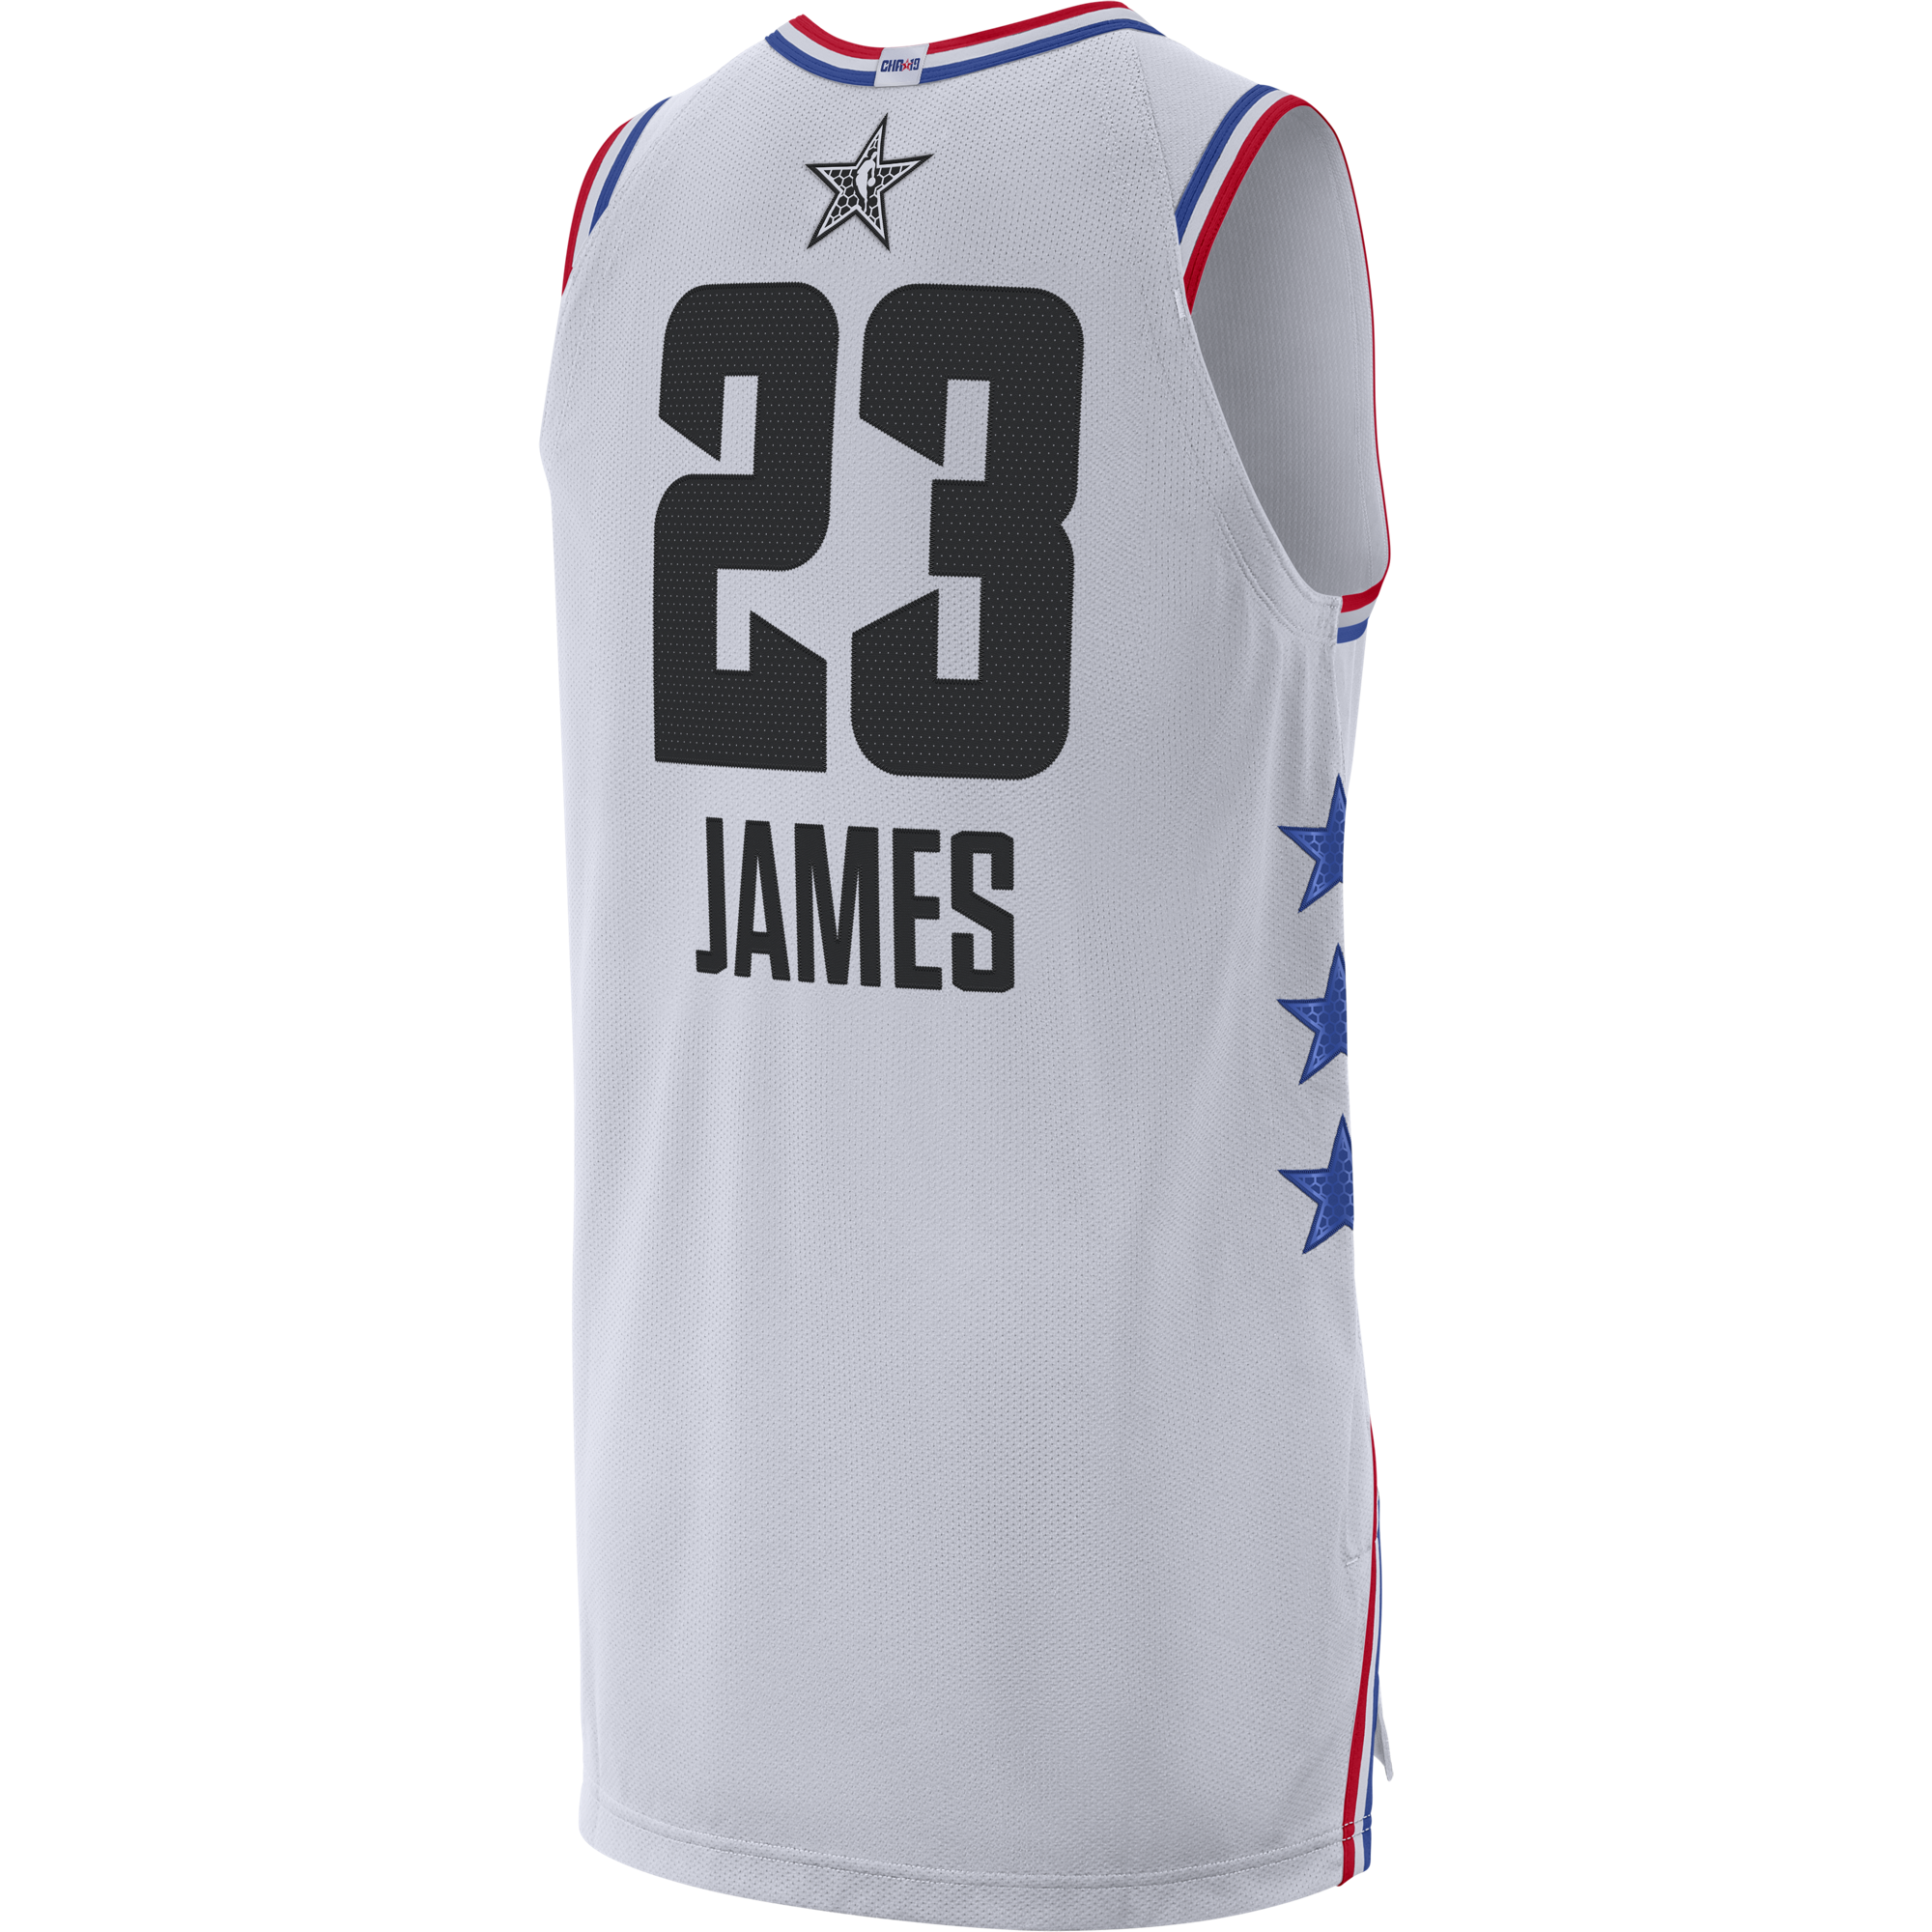 NIKE AIR JORDAN NBA ALL STAR WEEKEND 2019 LEBRON JAMES AUTHENTIC JERSEY  BLACK for £160.00